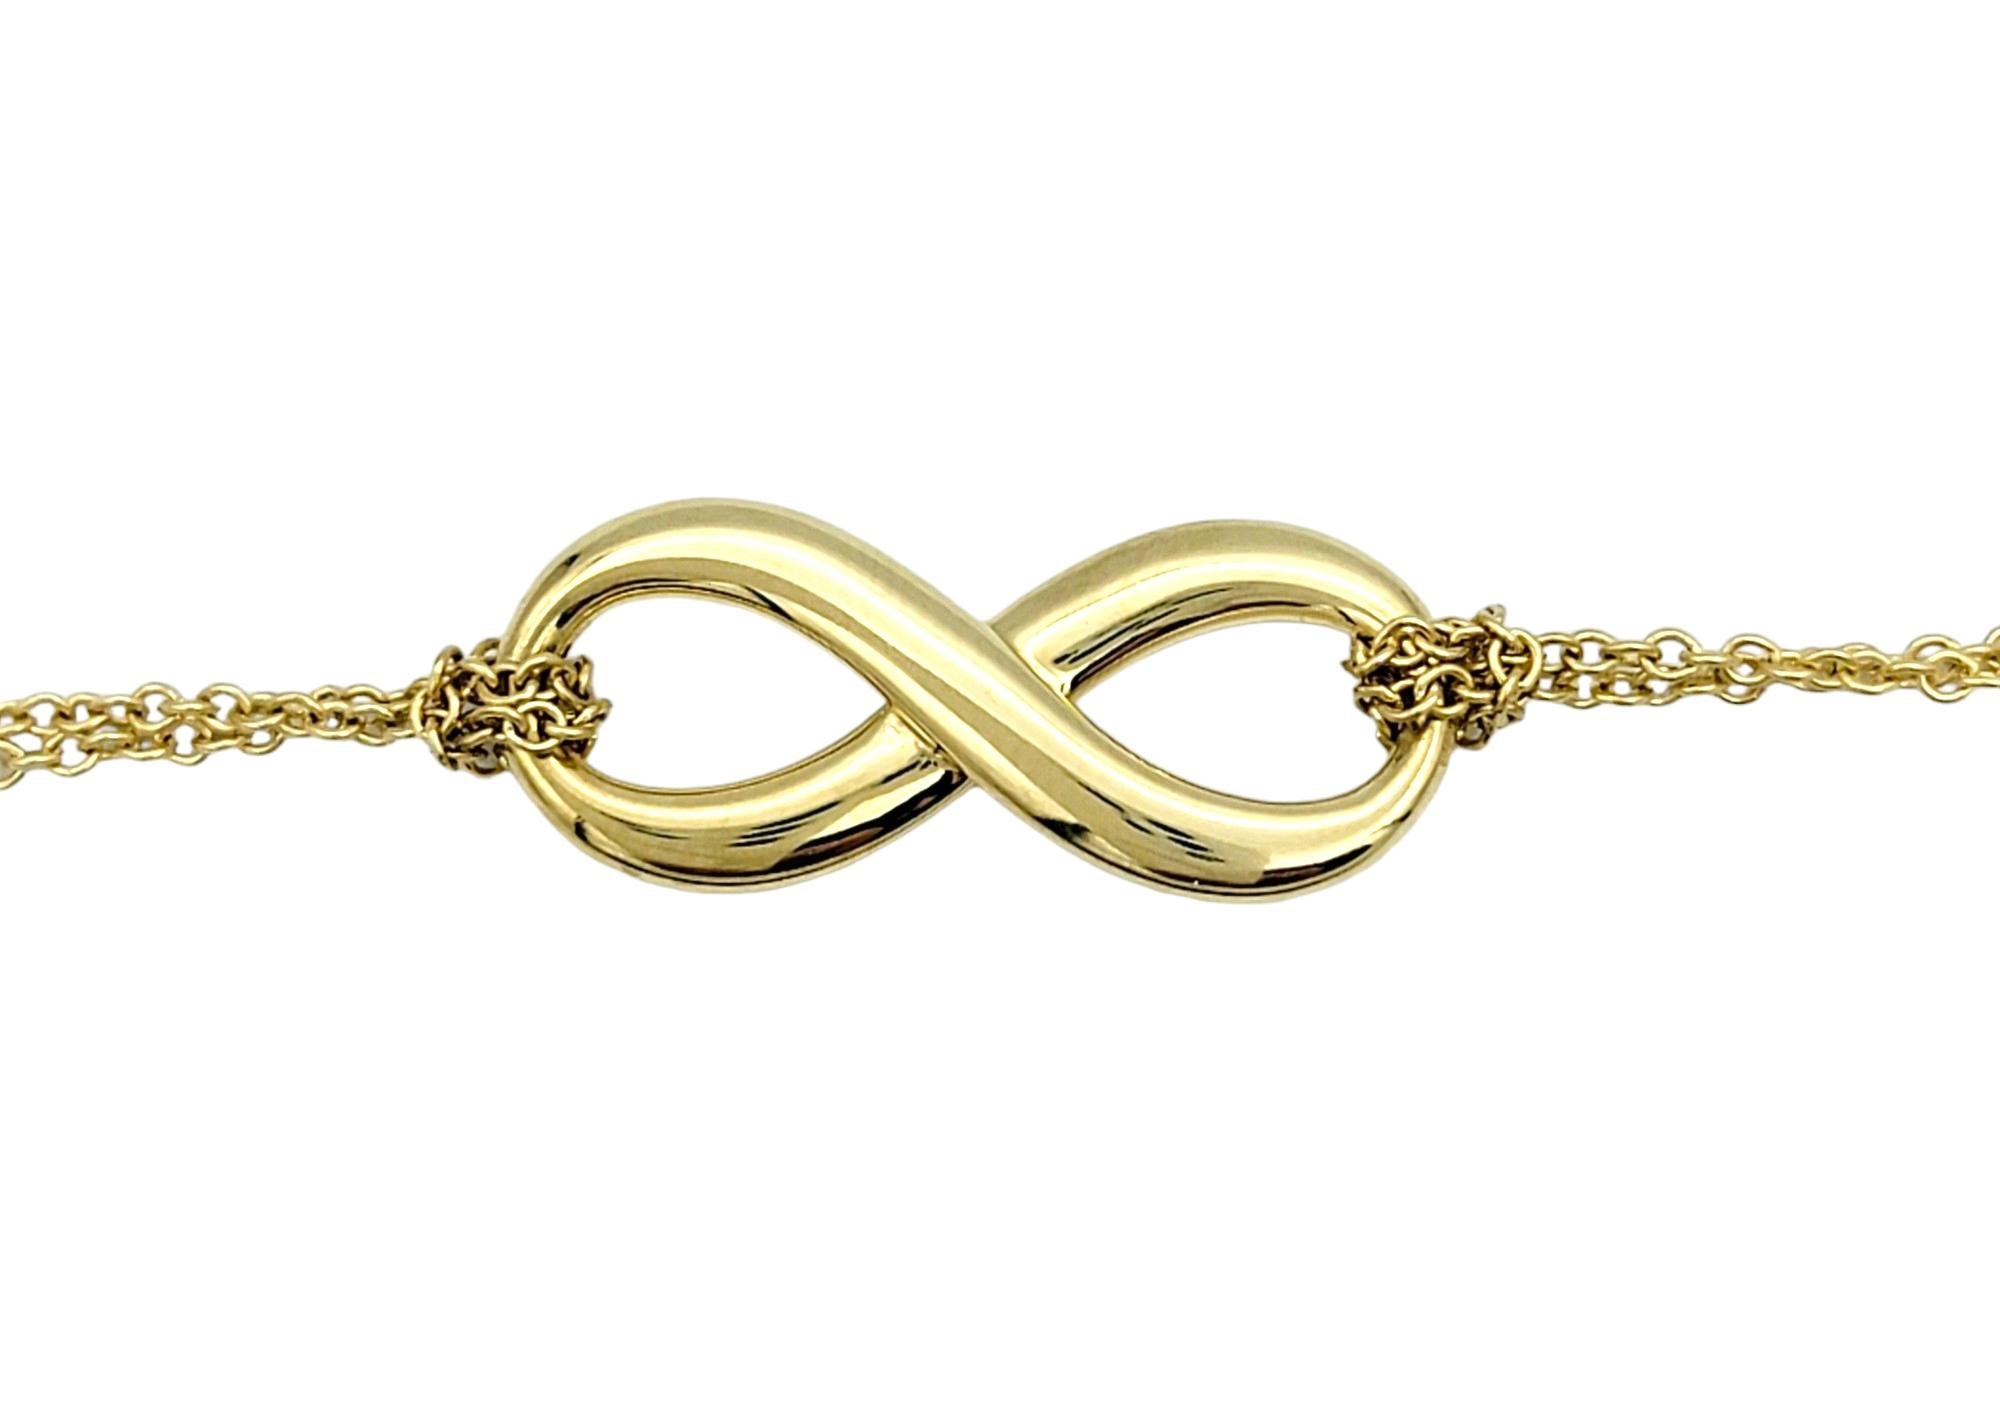 Contemporary Tiffany & Co. Double Chain Infinity Pendant Necklace Set in 18 Karat Yellow Gold For Sale